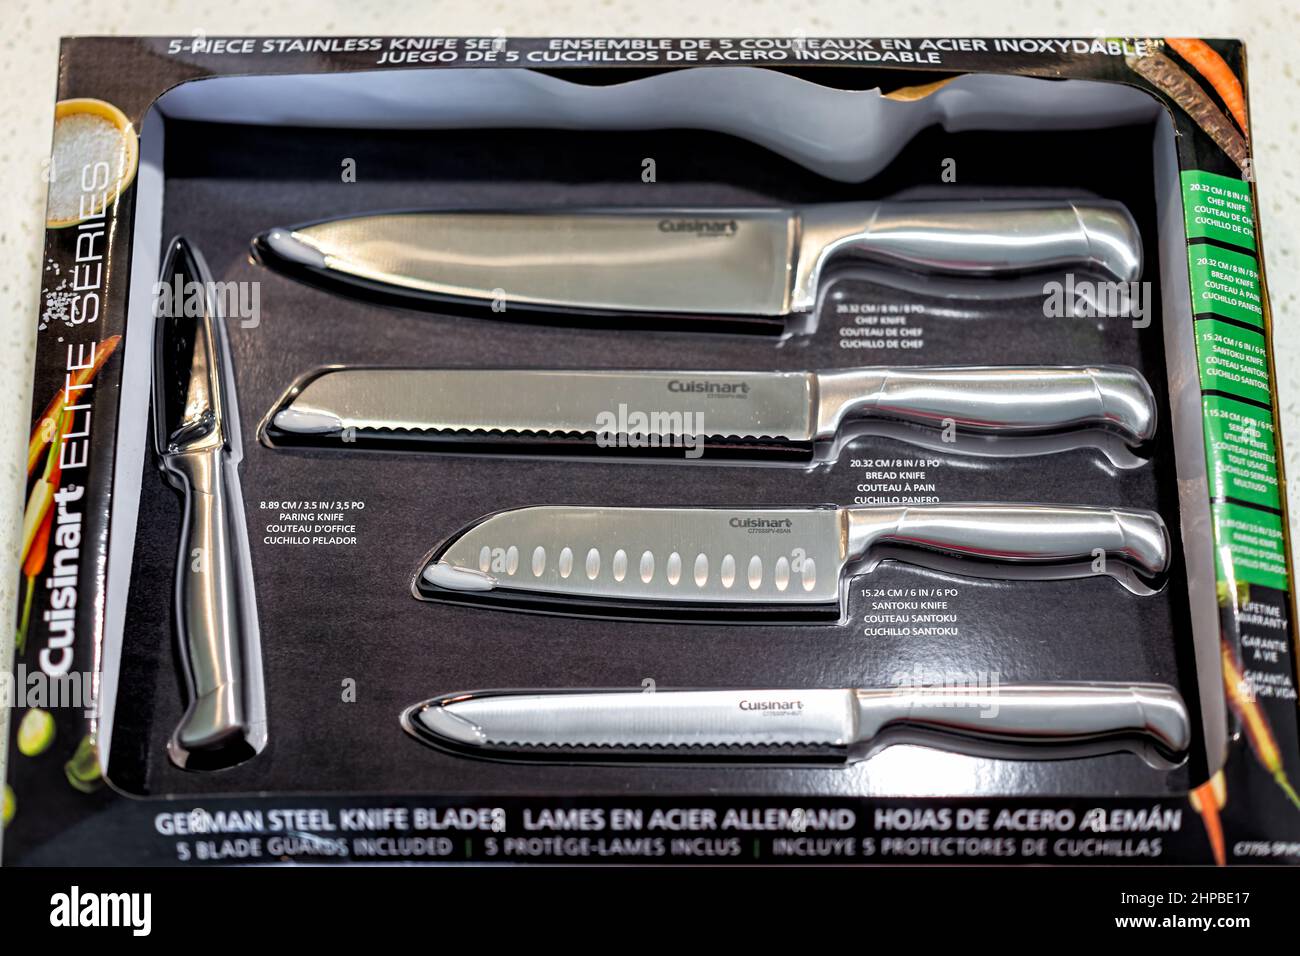 https://c8.alamy.com/comp/2HPBE17/naples-usa-october-21-2021-cuisinart-brand-new-stainless-steel-kitchen-knives-set-packaged-product-in-box-with-different-utensils-tools-such-as-s-2HPBE17.jpg